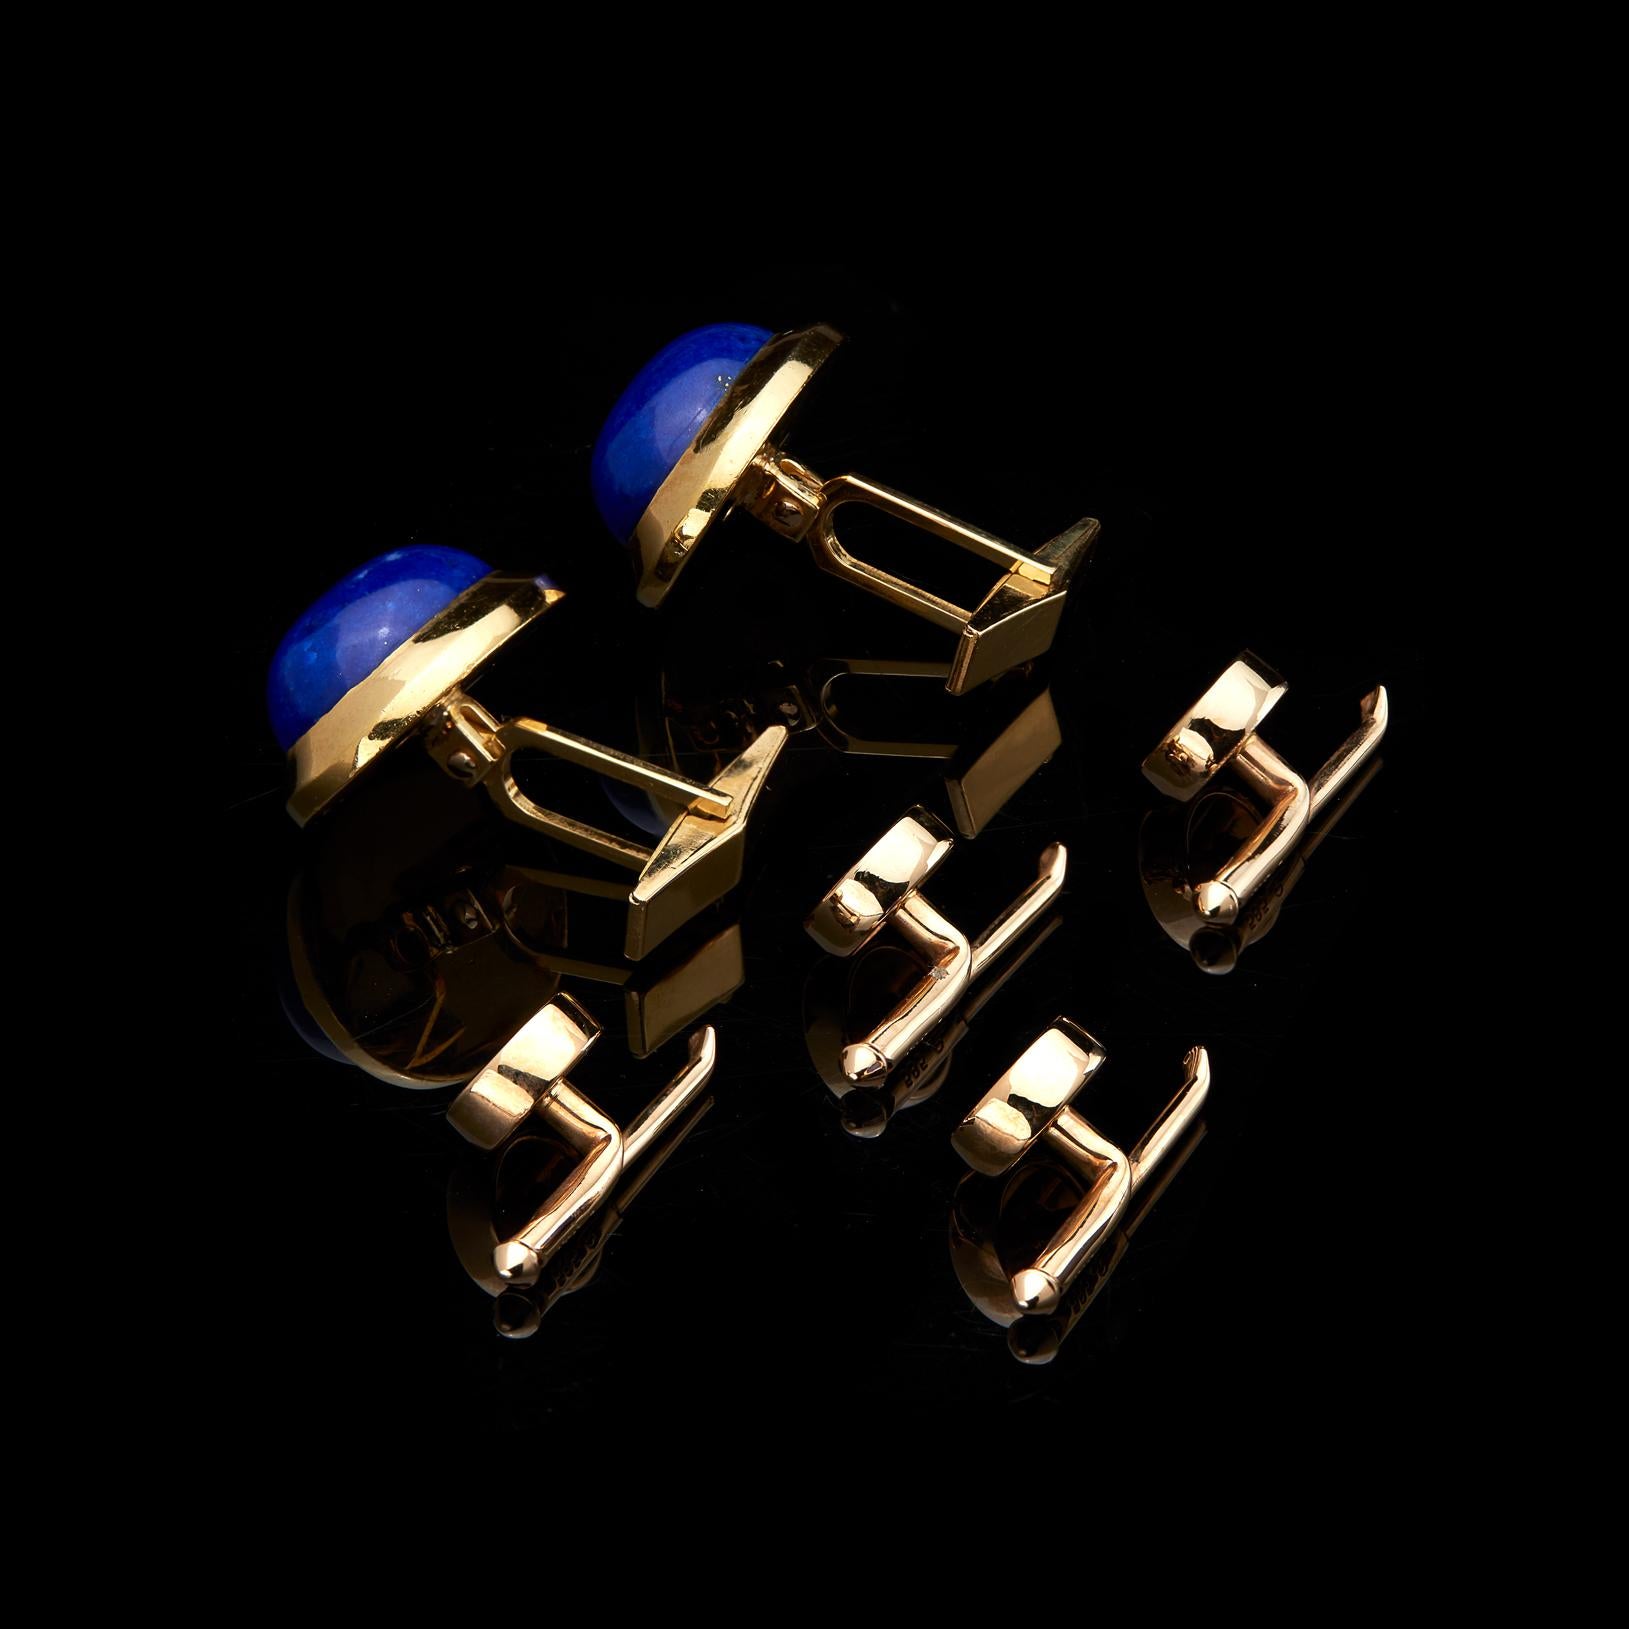 Modern, clean designed gent's dress set. The pair of 18k gold cufflinks are set with oval lapis lazuli cabochons, approximately 17 x 12.8mm, together with four 14k gold shirt studs, each with in-set lapis tablet. Gross weight approximately 27.7